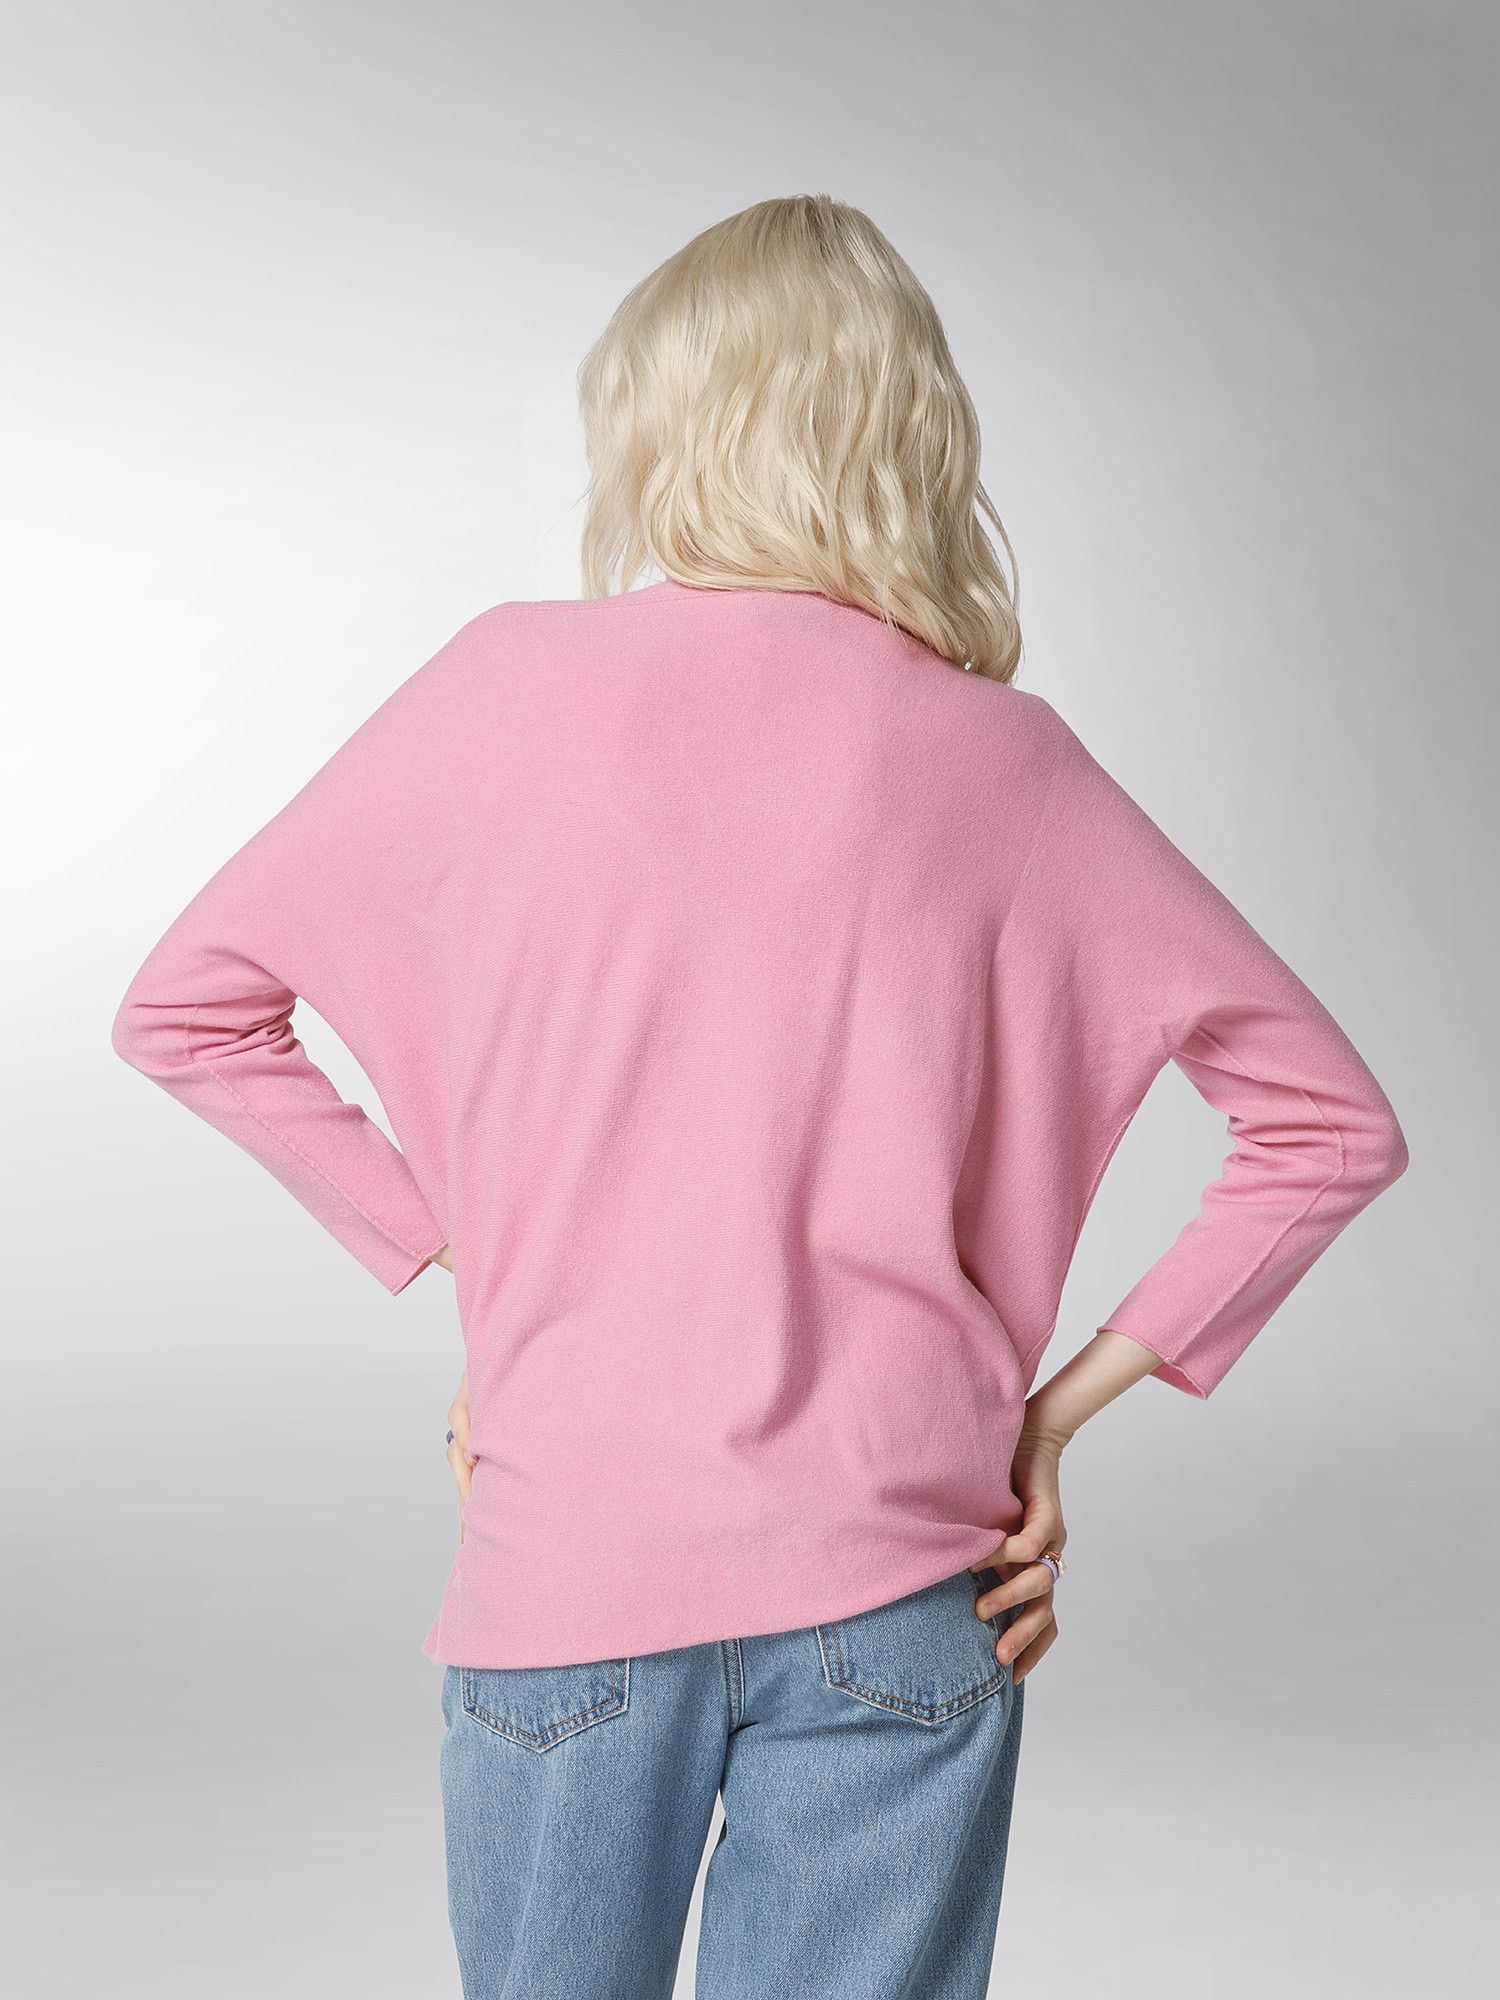 K Collection - Pullover, Rosa fuxia, large image number 4